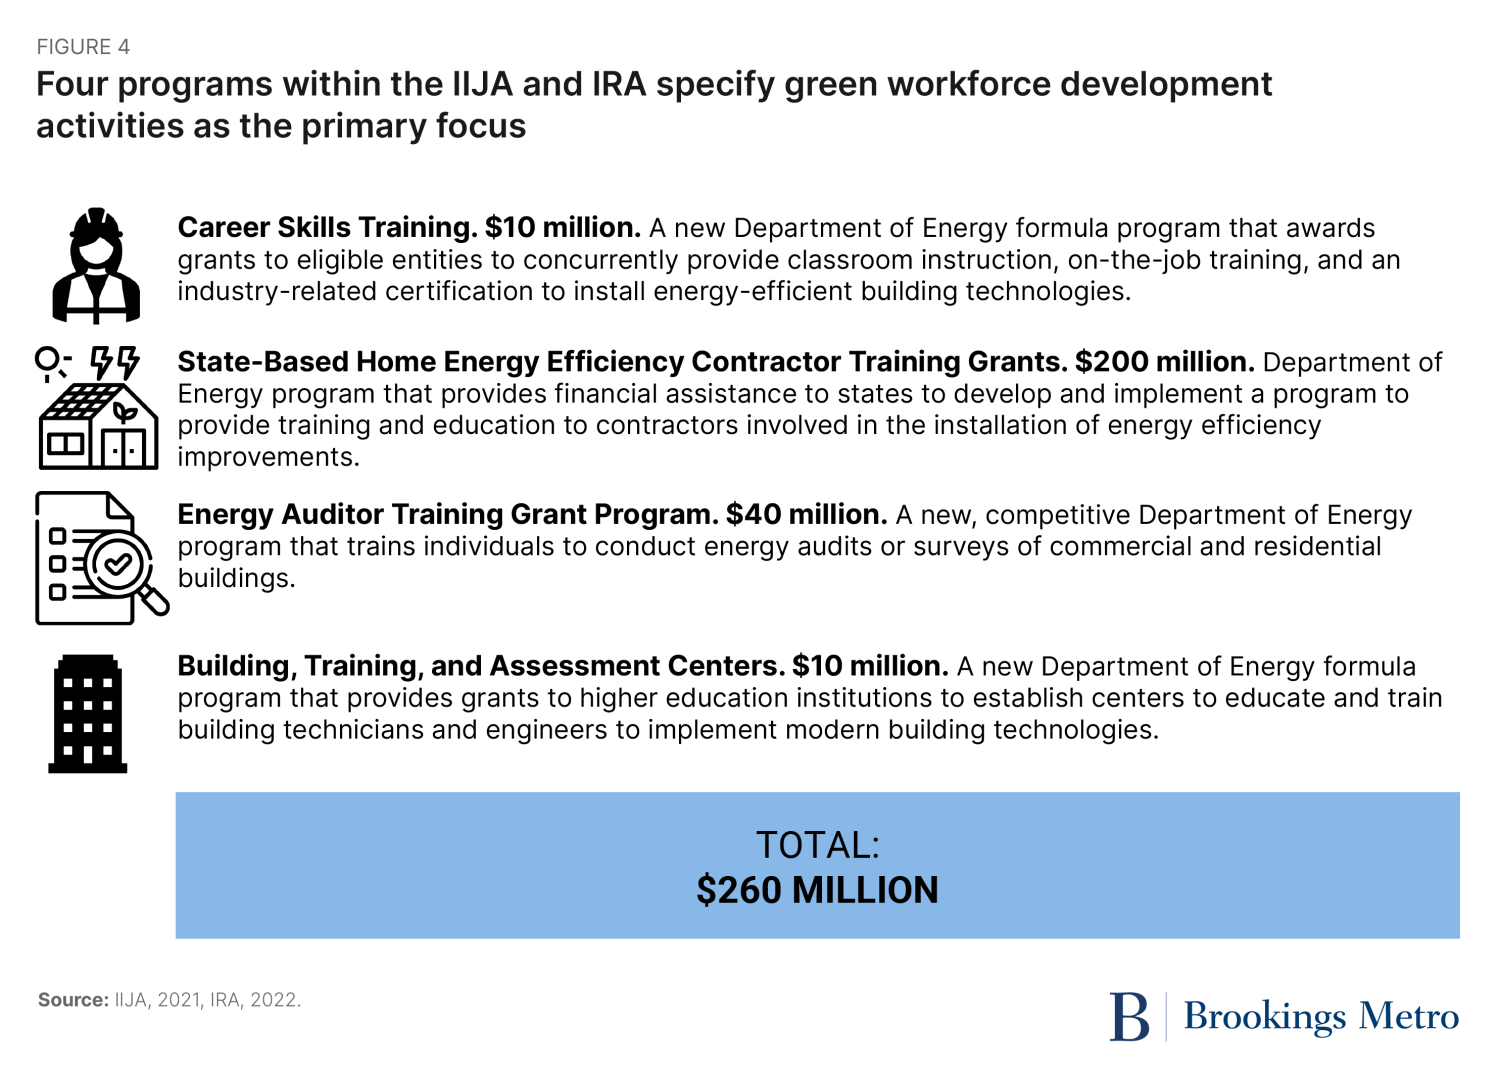 Figure 4. Four programs within the IIJA and IRA specify green workforce development activities as the primary focus